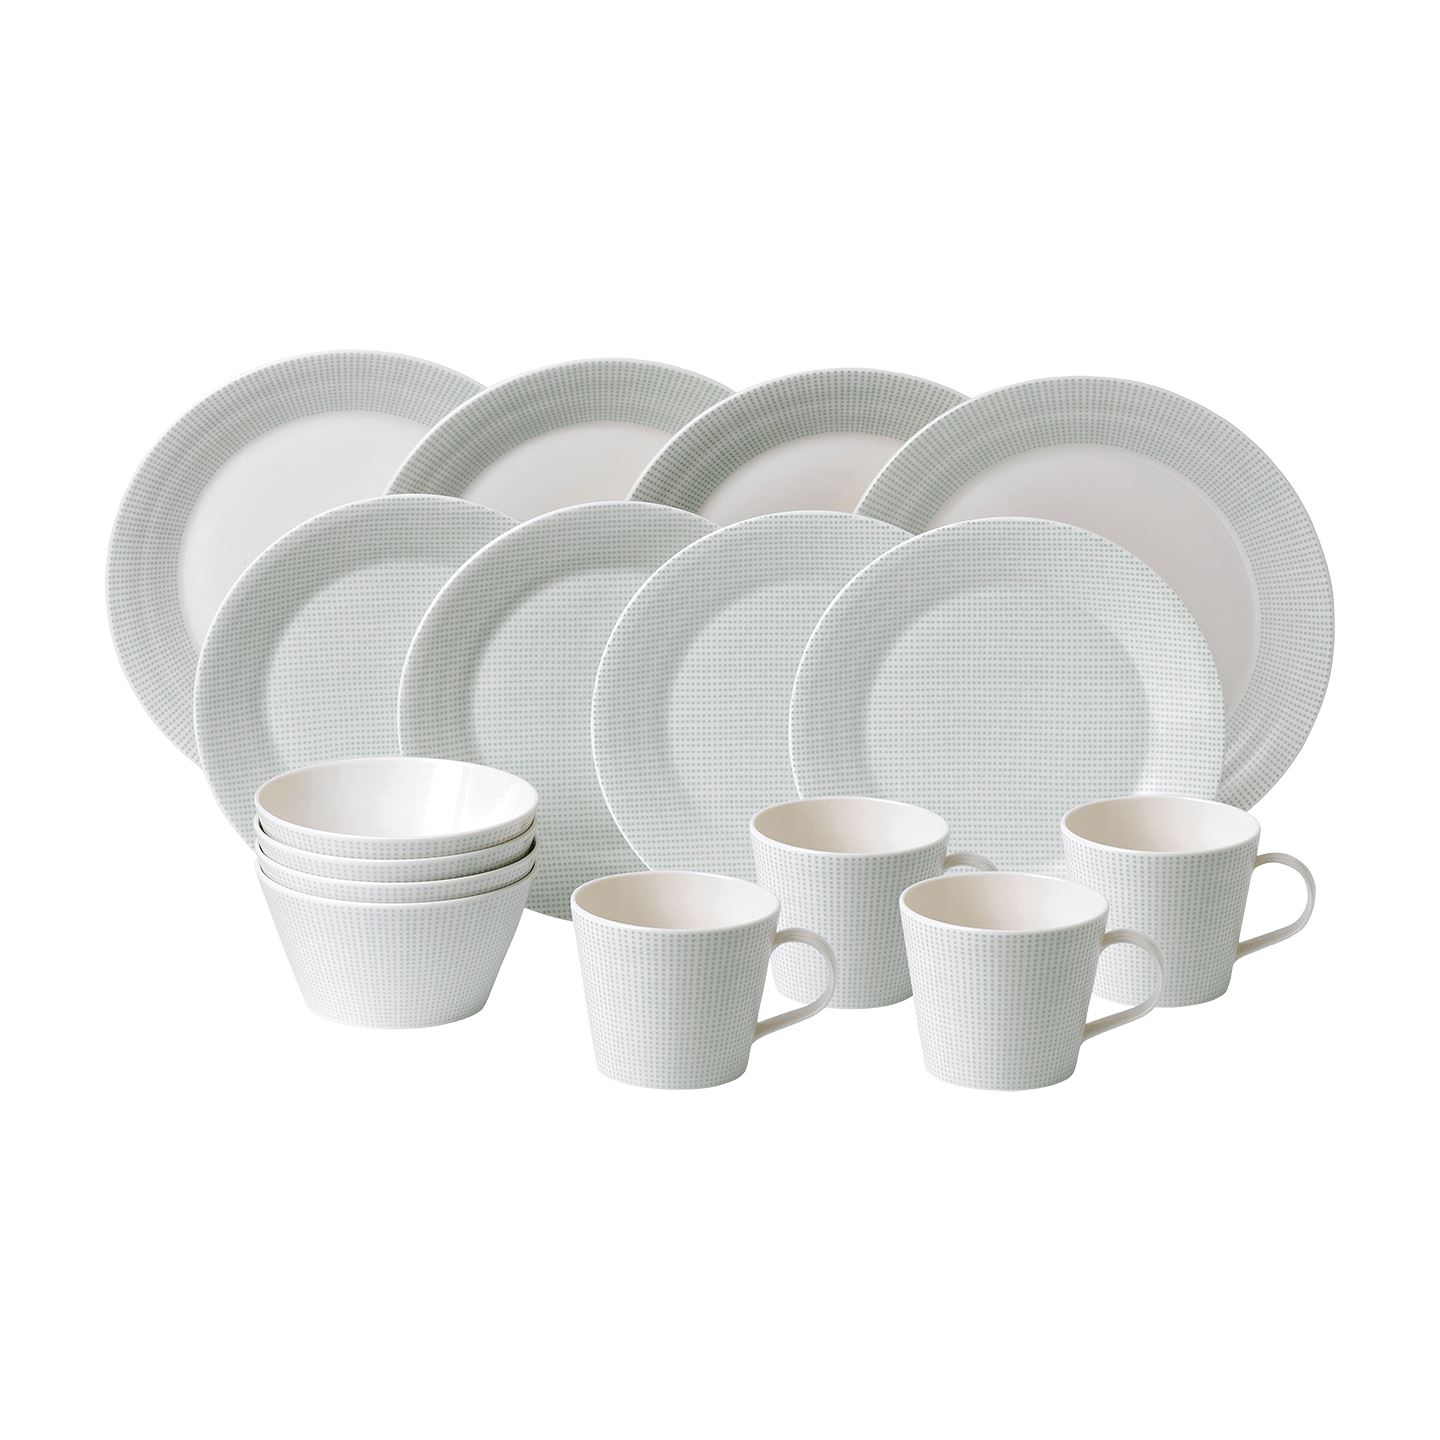 NEW/UNUSED DOTS ROYAL DOULTON PACIFIC 16 PIECE DINNER SET 